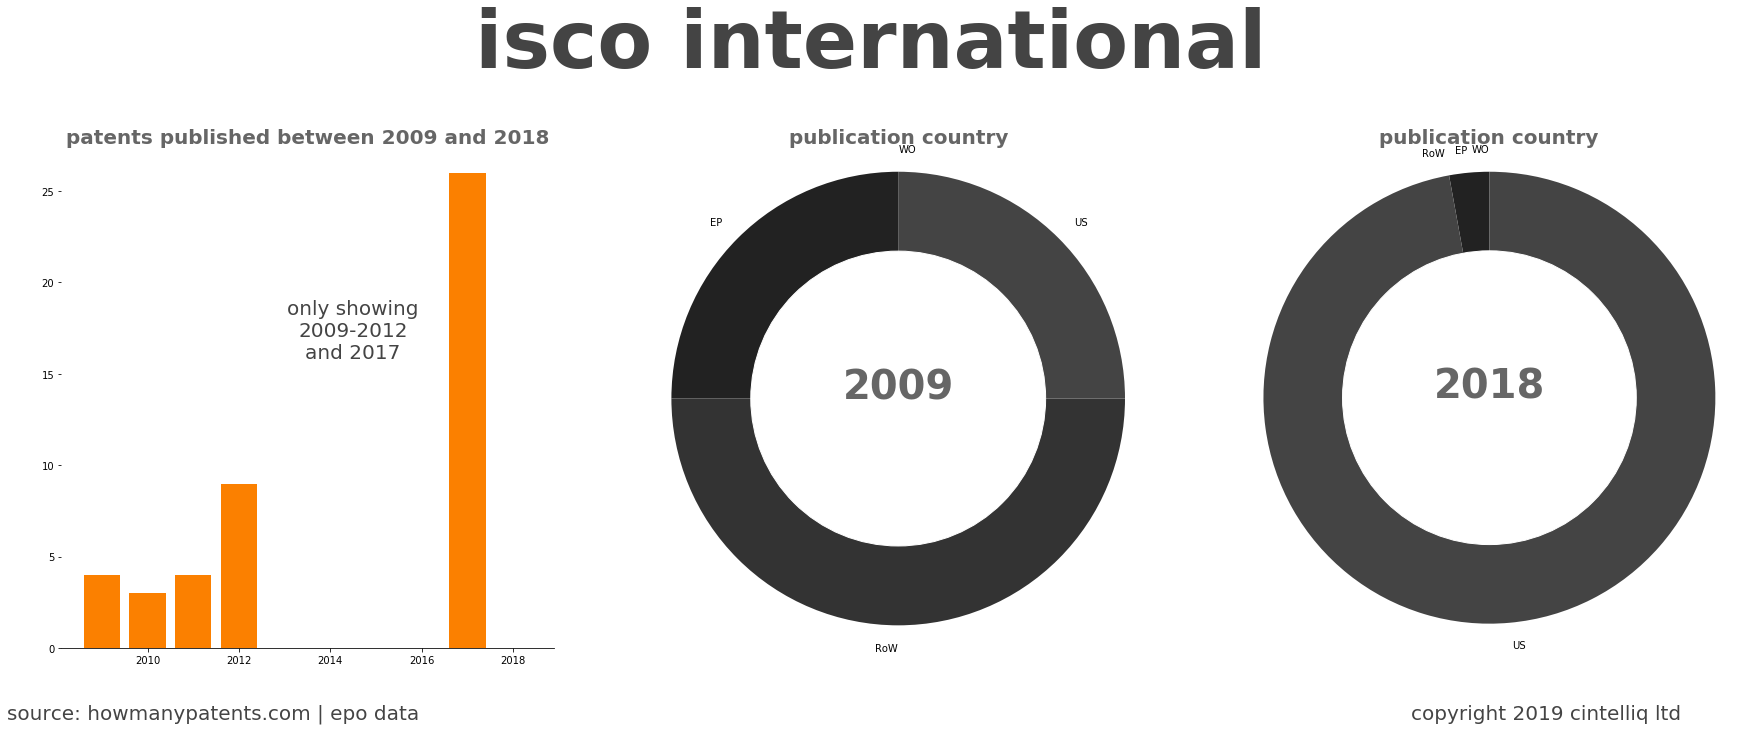 summary of patents for Isco International